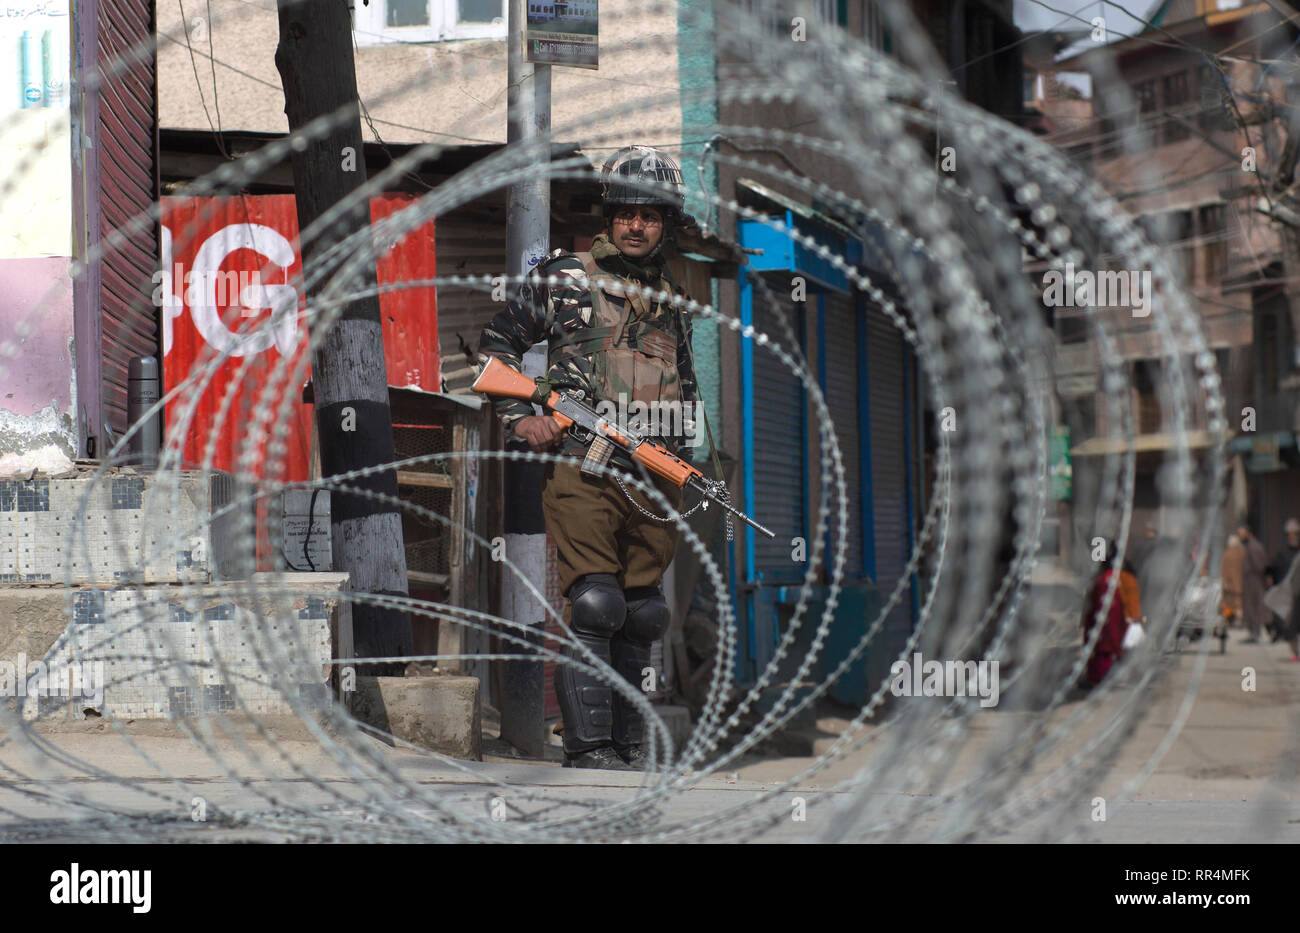 (190224) -- SRINAGAR, Feb. 24, 2019 (Xinhua) -- An Indian paramilitary trooper stands guard near a barbed wire barricade during a security lockdown in downtown area of Srinagar, the summer capital of Indian-controlled Kashmir, Feb. 24, 2019. Indian-controlled Kashmir Sunday observed a shutdown to protest arrests of political activists and move of legally abrogating a law - Article 35 A of Indian constitution - that confers special status to the region. The strike call was given by the region's separatist groups under the leadership Joint Resistance Leadership (JRL) condemning arrests and feari Stock Photo